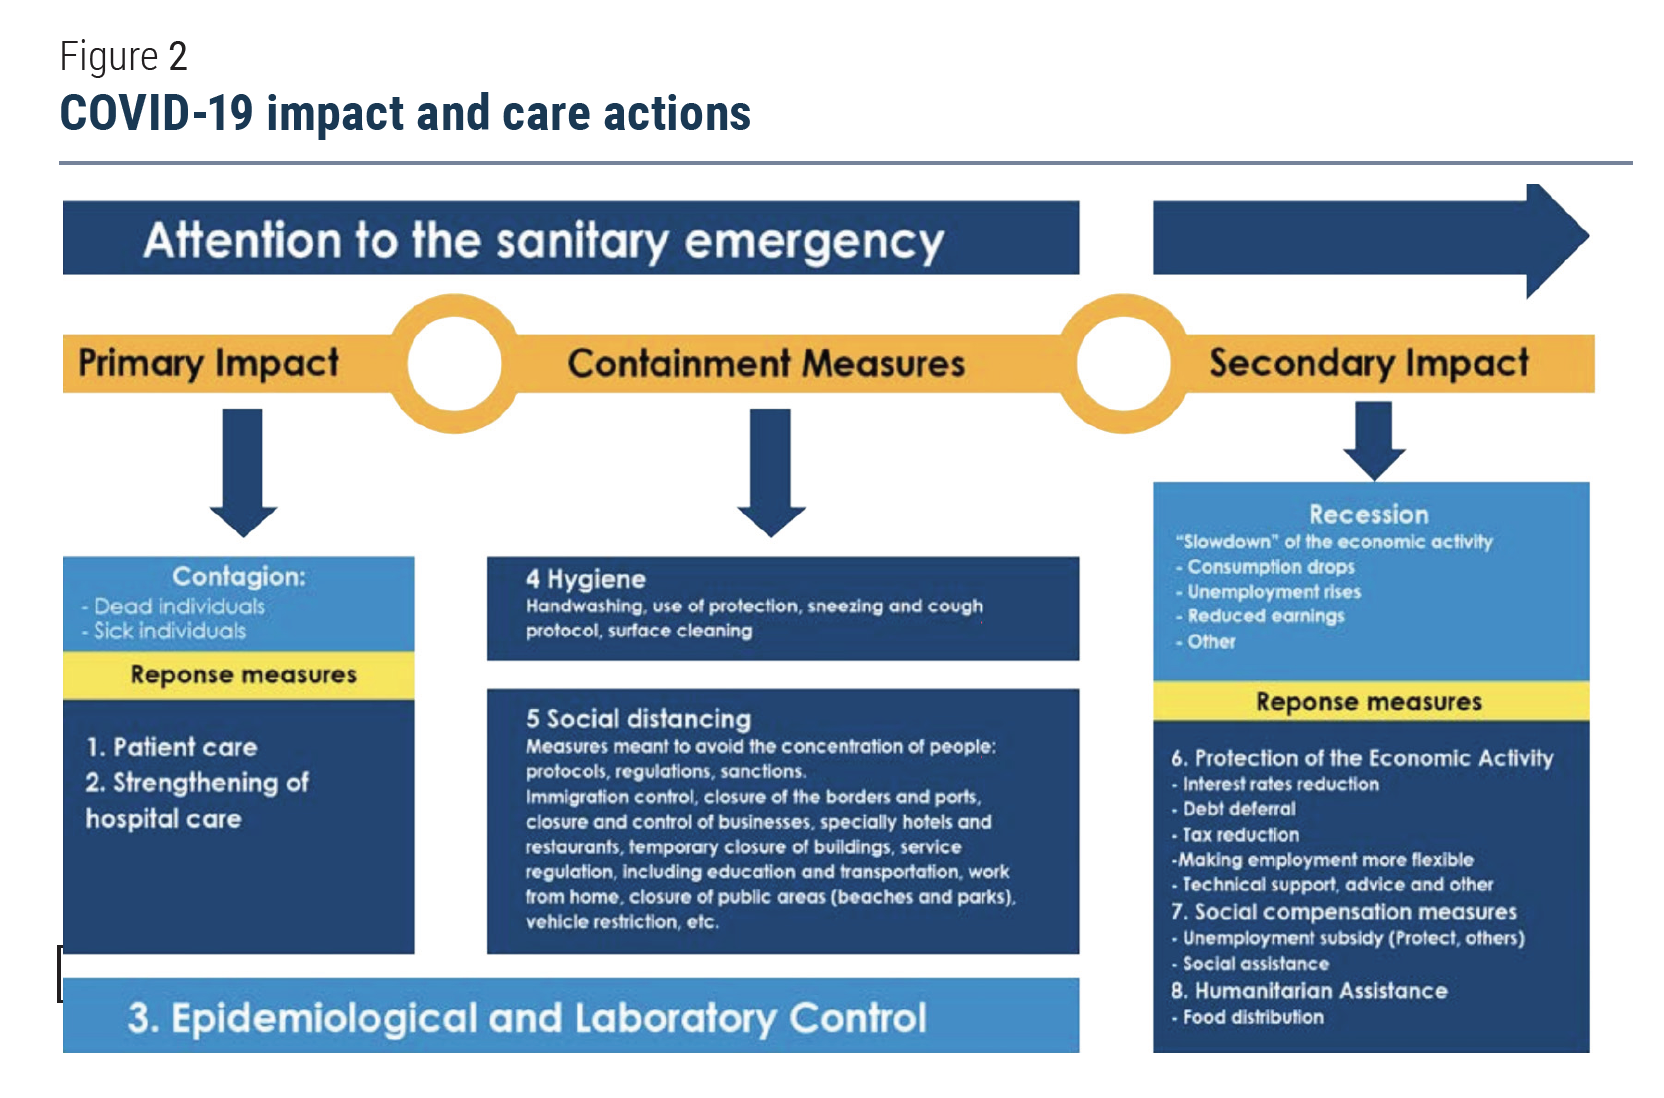 COVID-19 impact and care actions graph